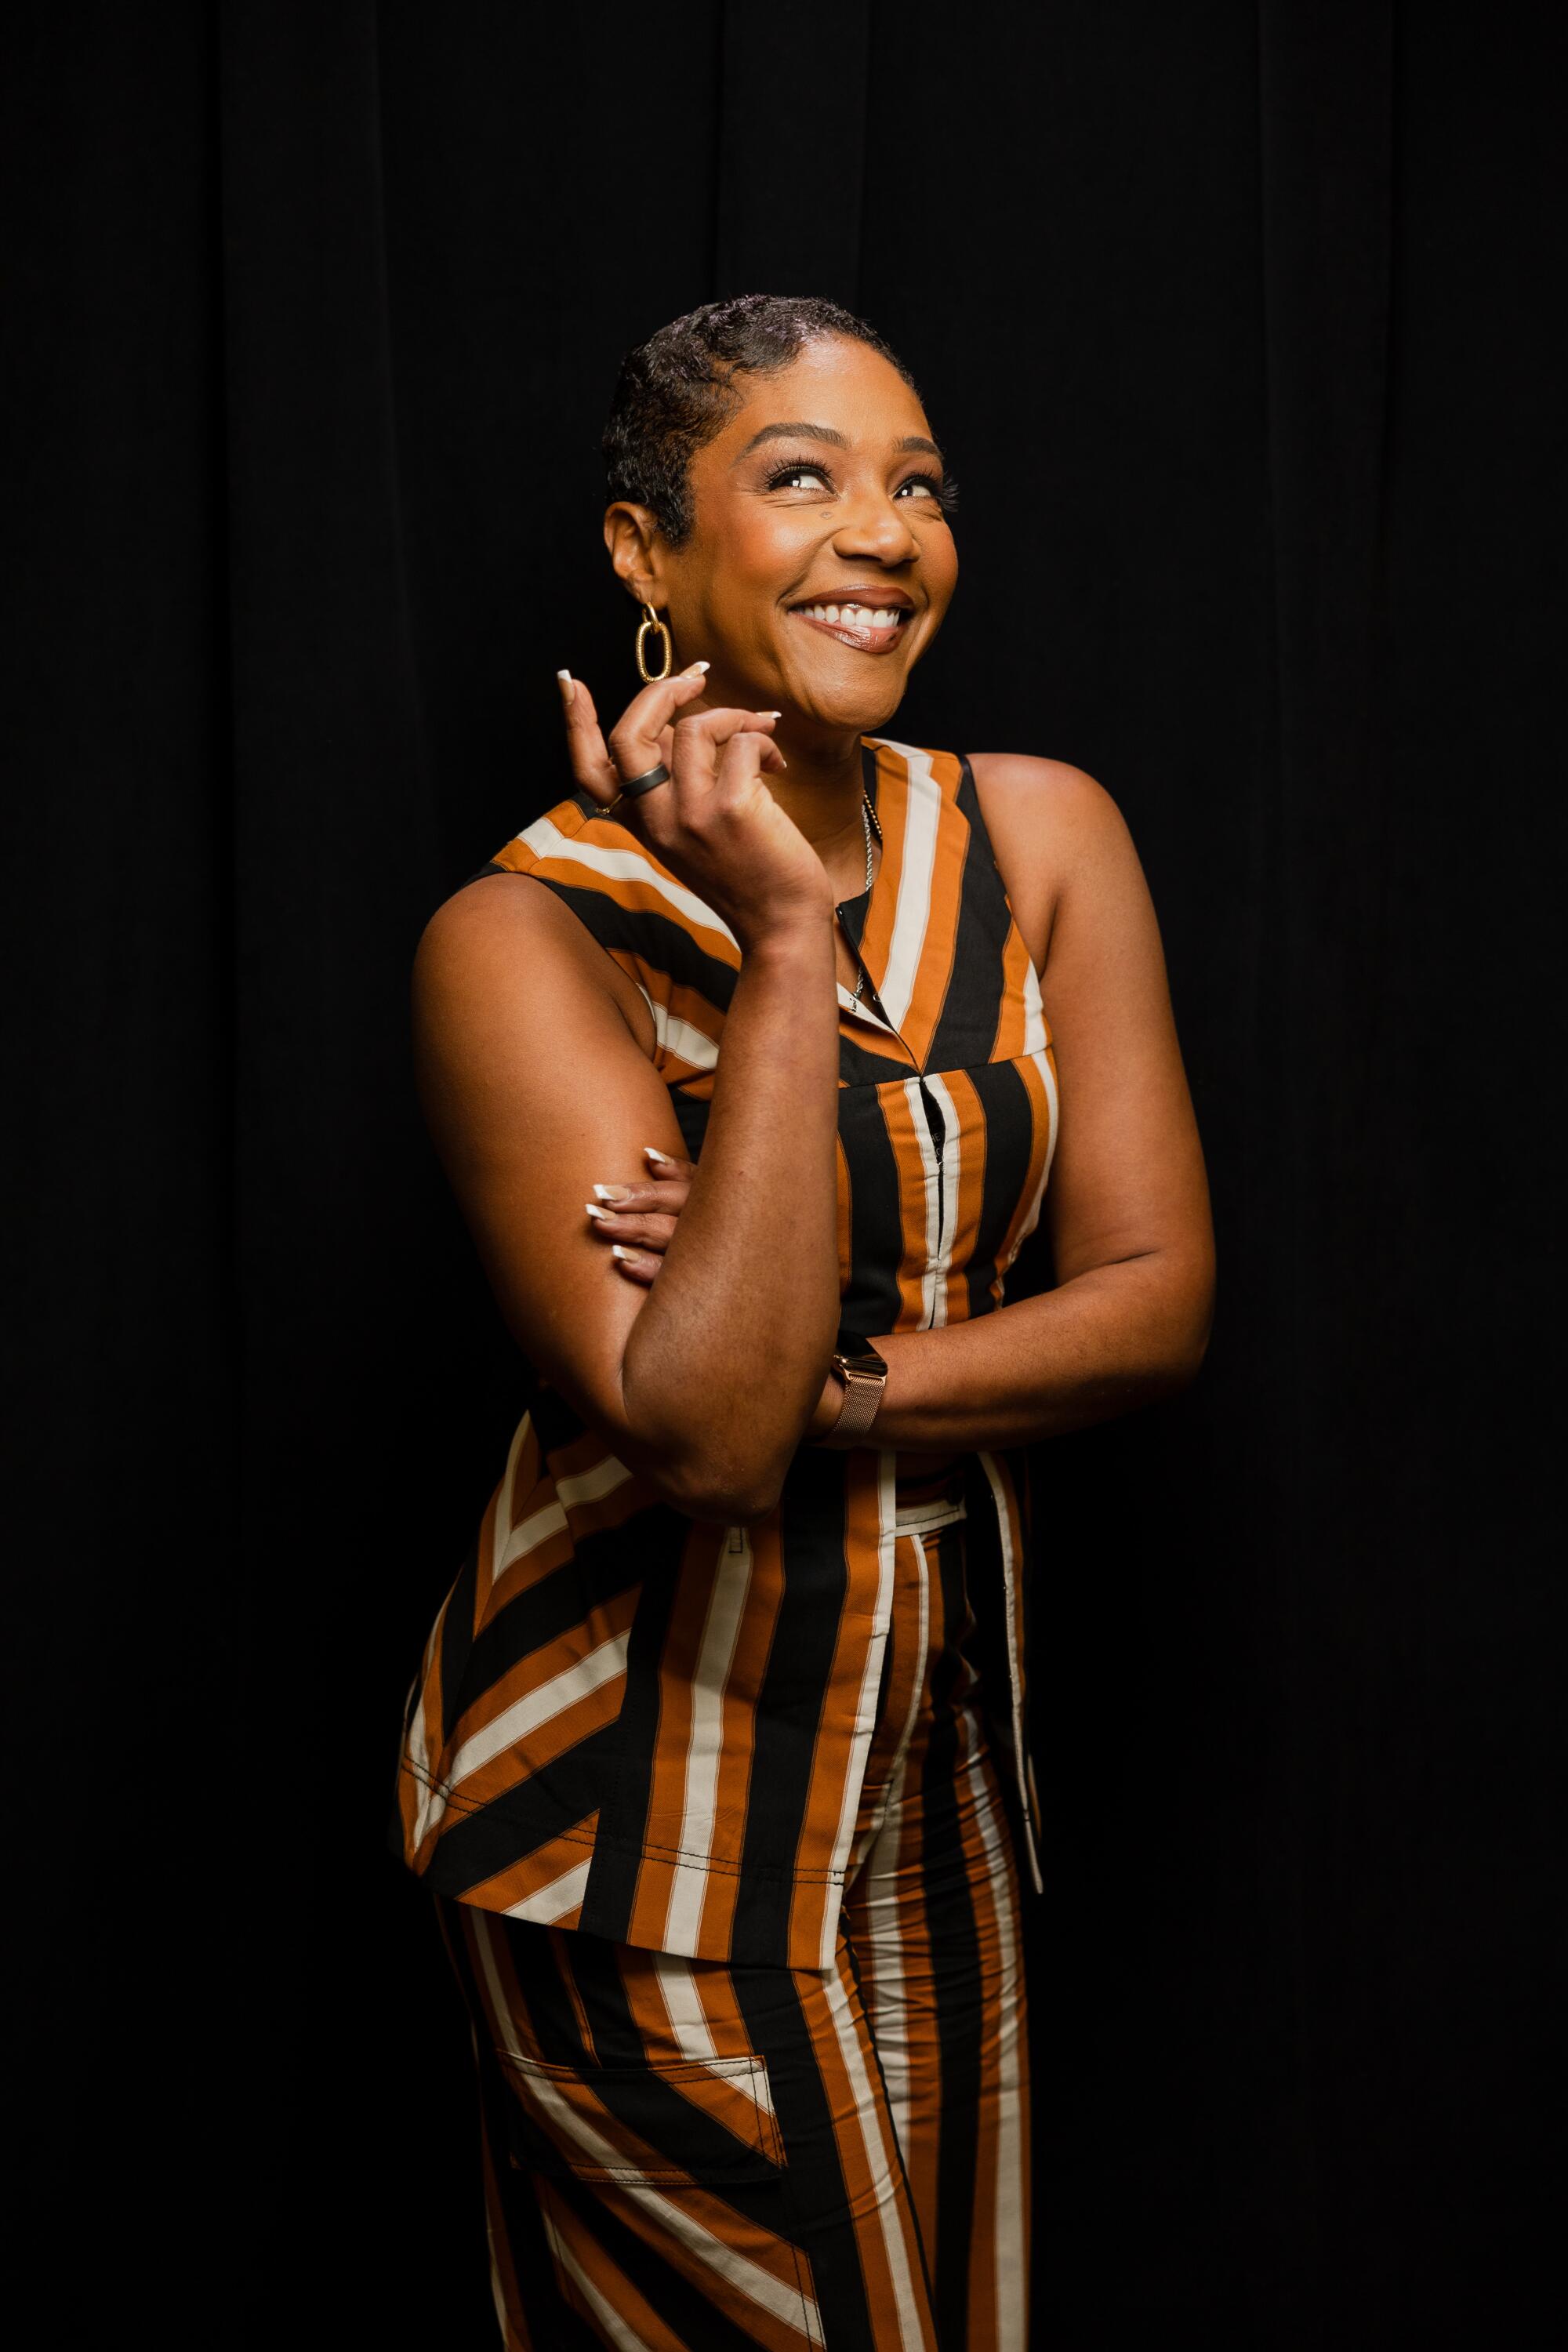 A woman smiles and stands against a black background.